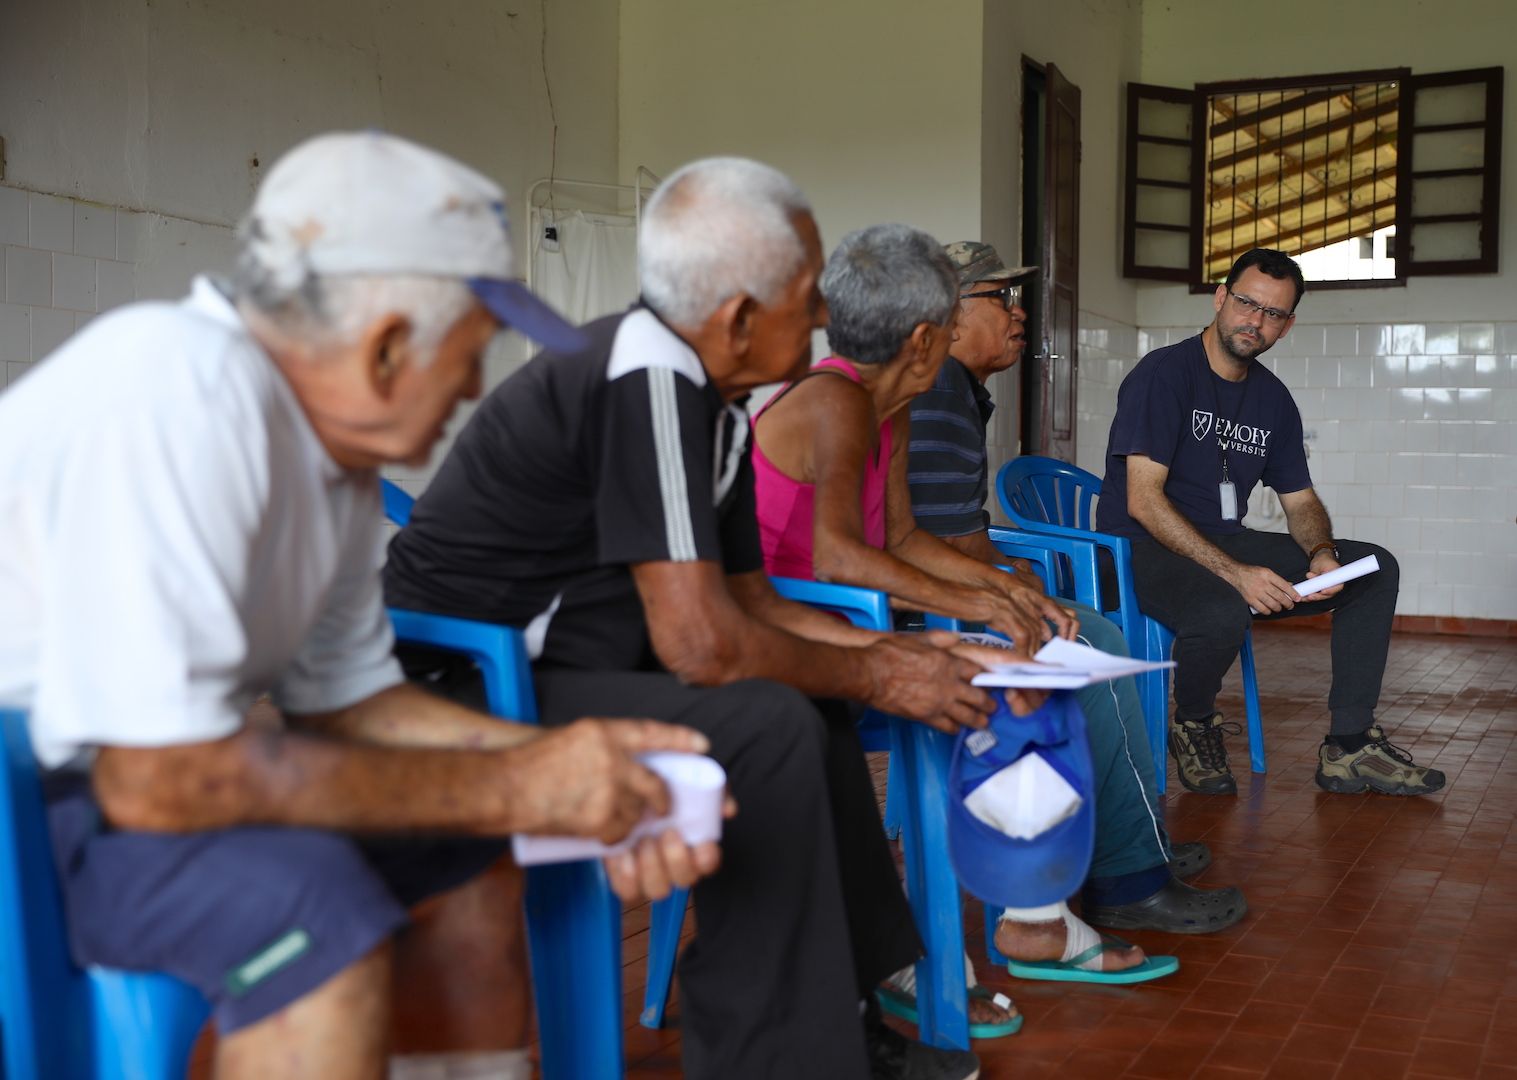 Fellow residents and Dr. Josafá Barreto, a physical therapist, listen to Cardoso speak during one of Prata’s public town hall meetings. Image by Anton L. Delgado. Brazil, 2020.